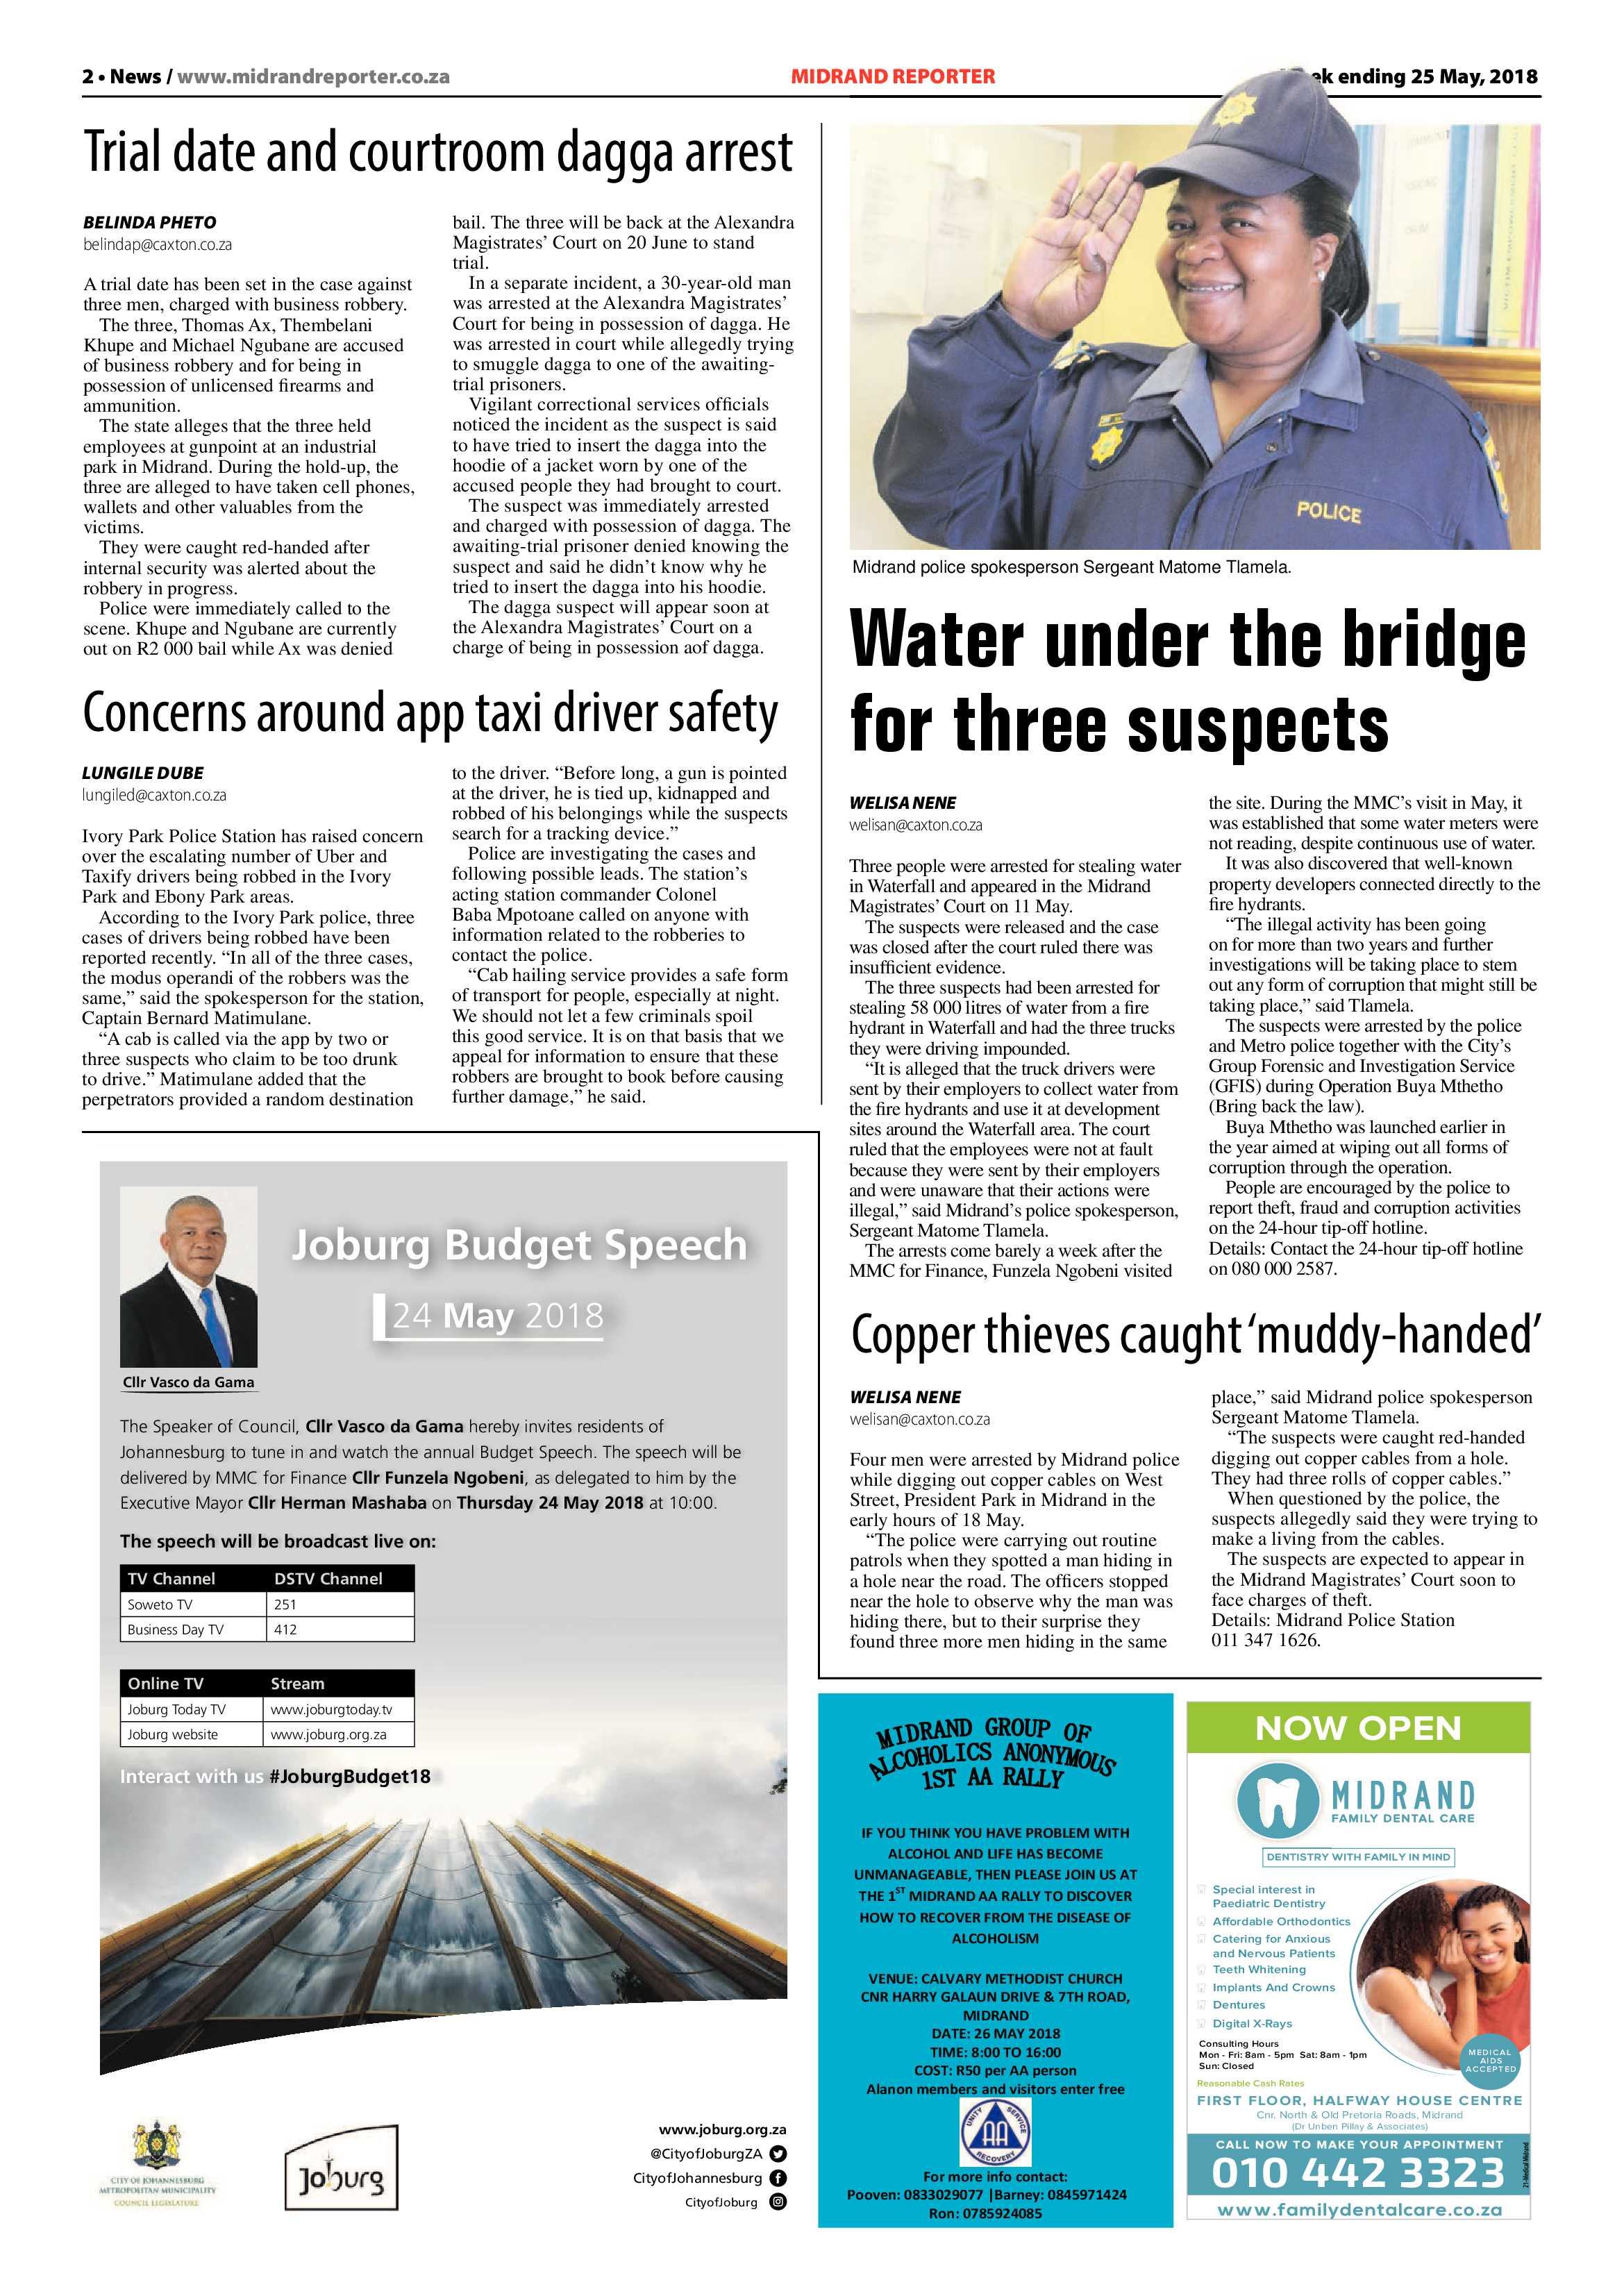 Midrand Reporter 25 May 2018 page 2